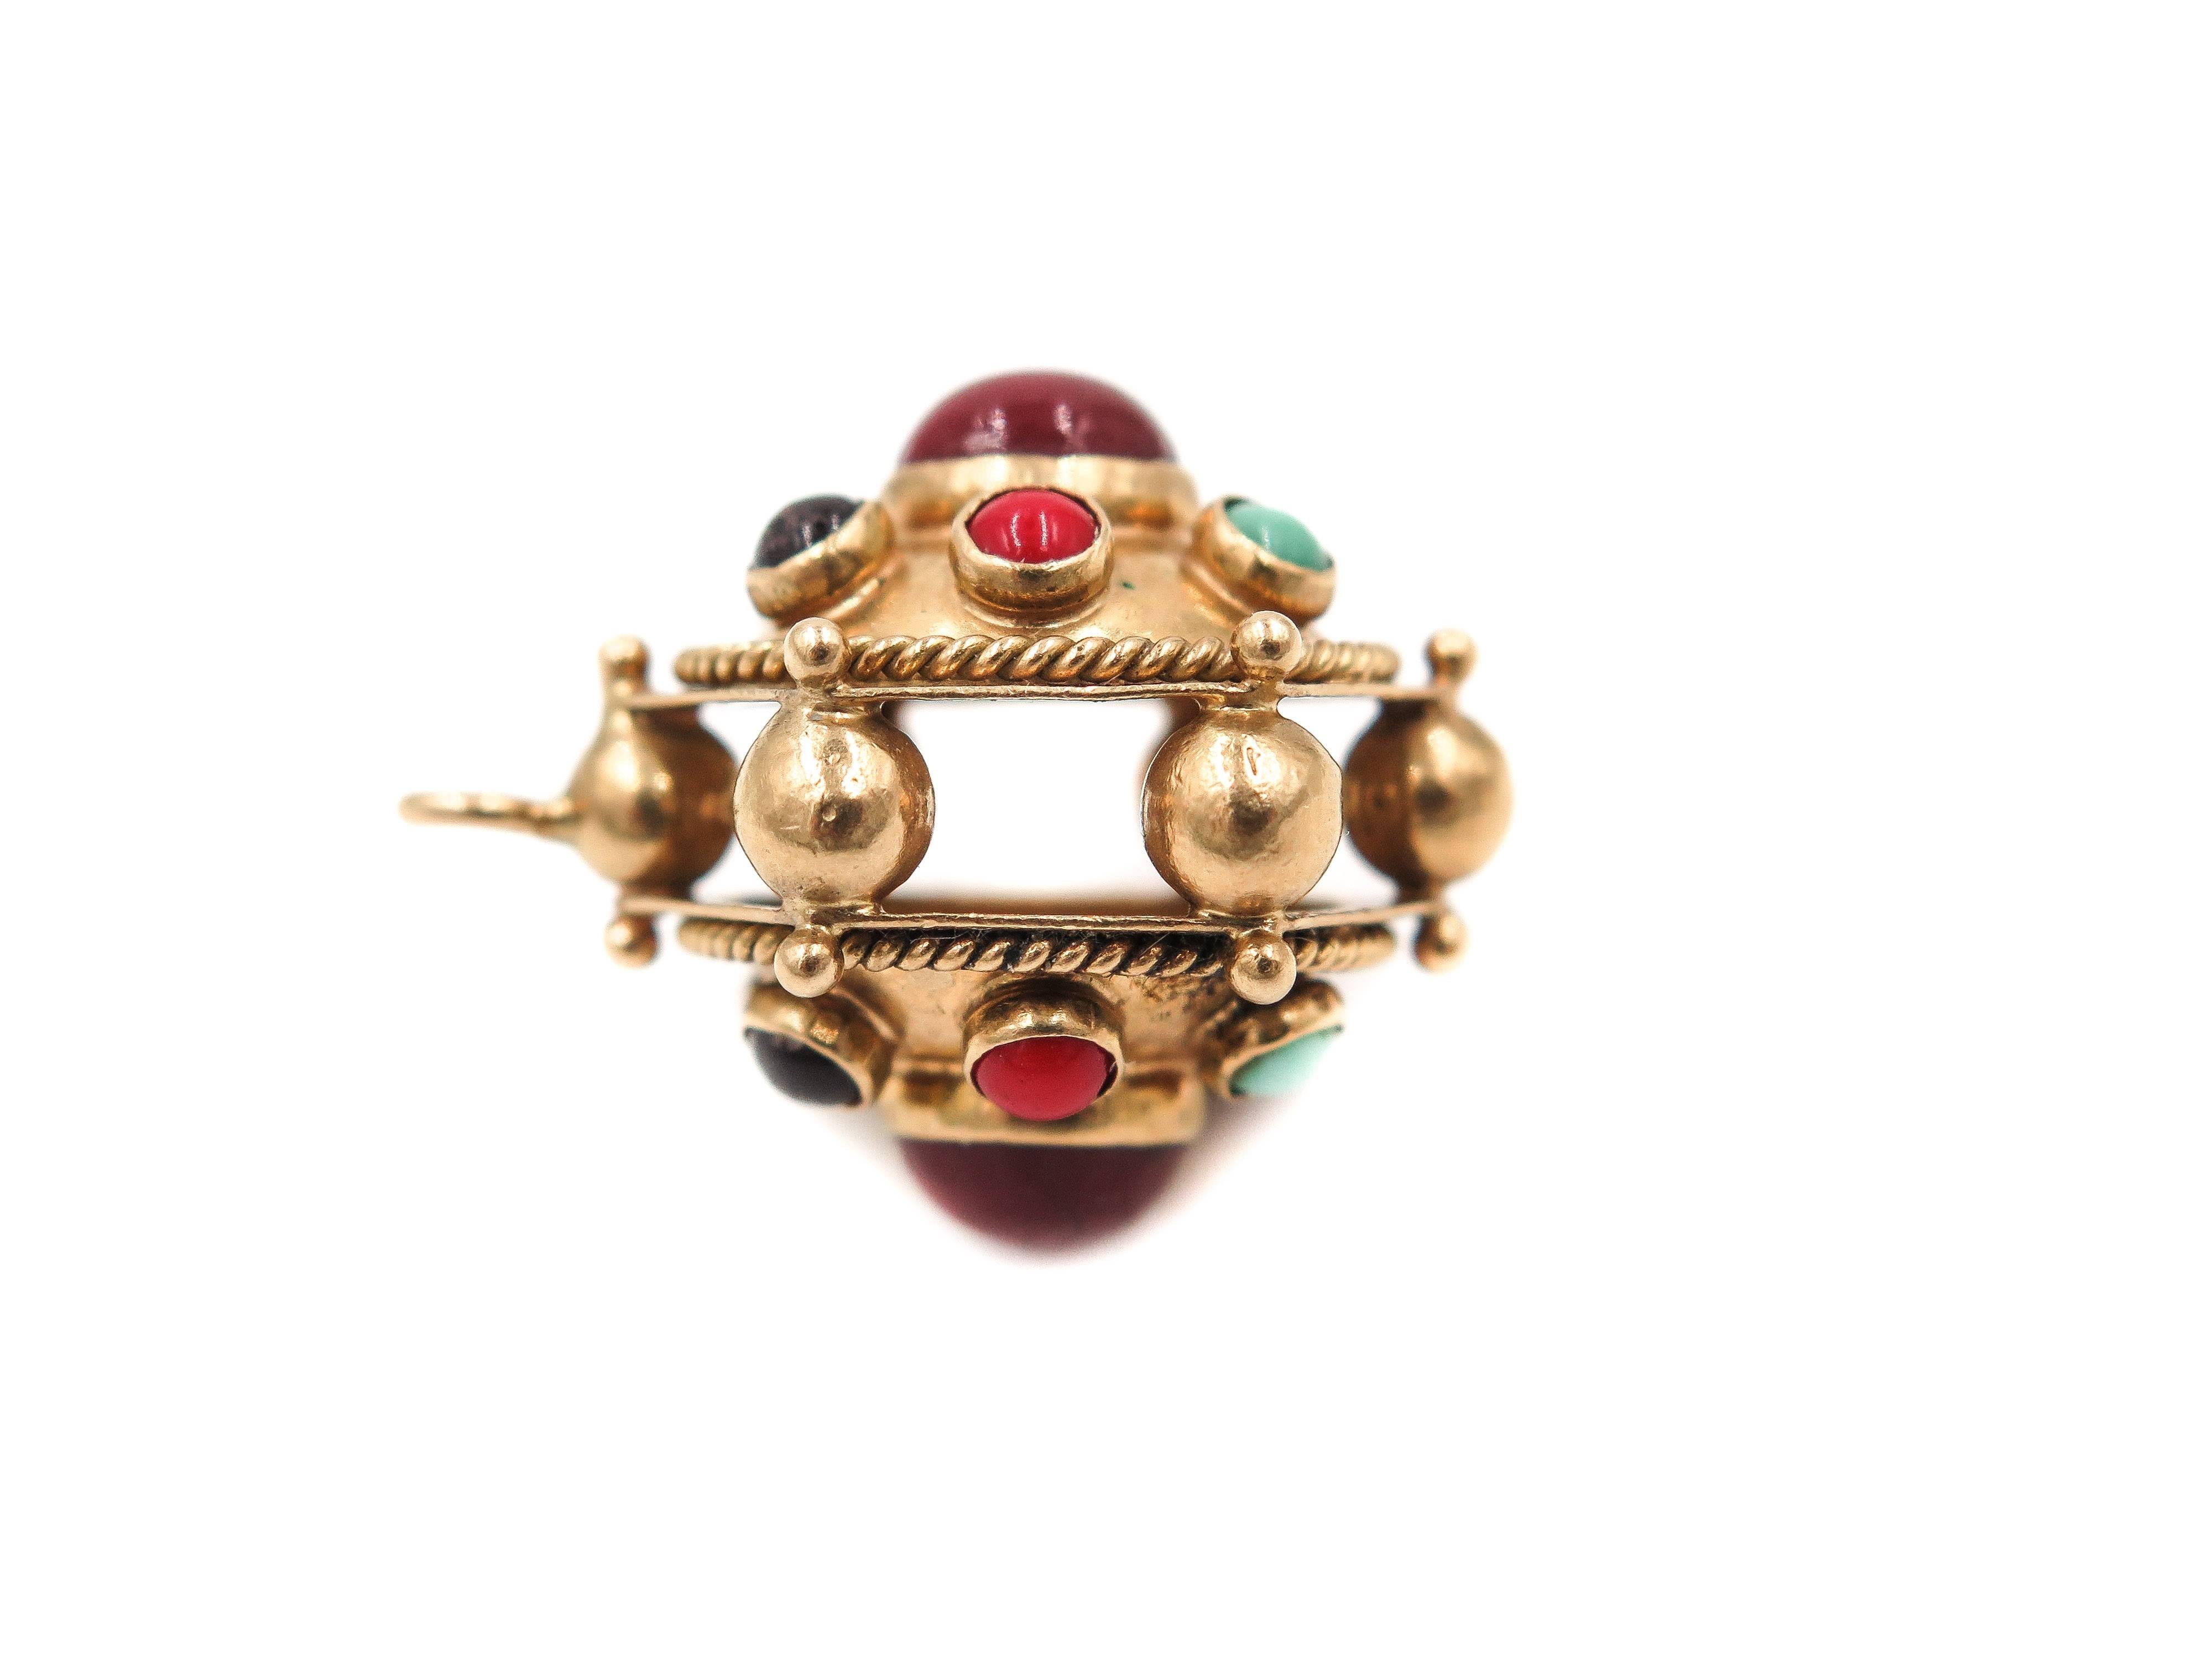 This beautiful etruscan style vintage charm is comprised of multiple cabochon cut stones like: Turquoise, coral, amethyst and carnelians.
Artistically crafted in 18k yellow gold, this charm will compliment beautifully your existing collection of